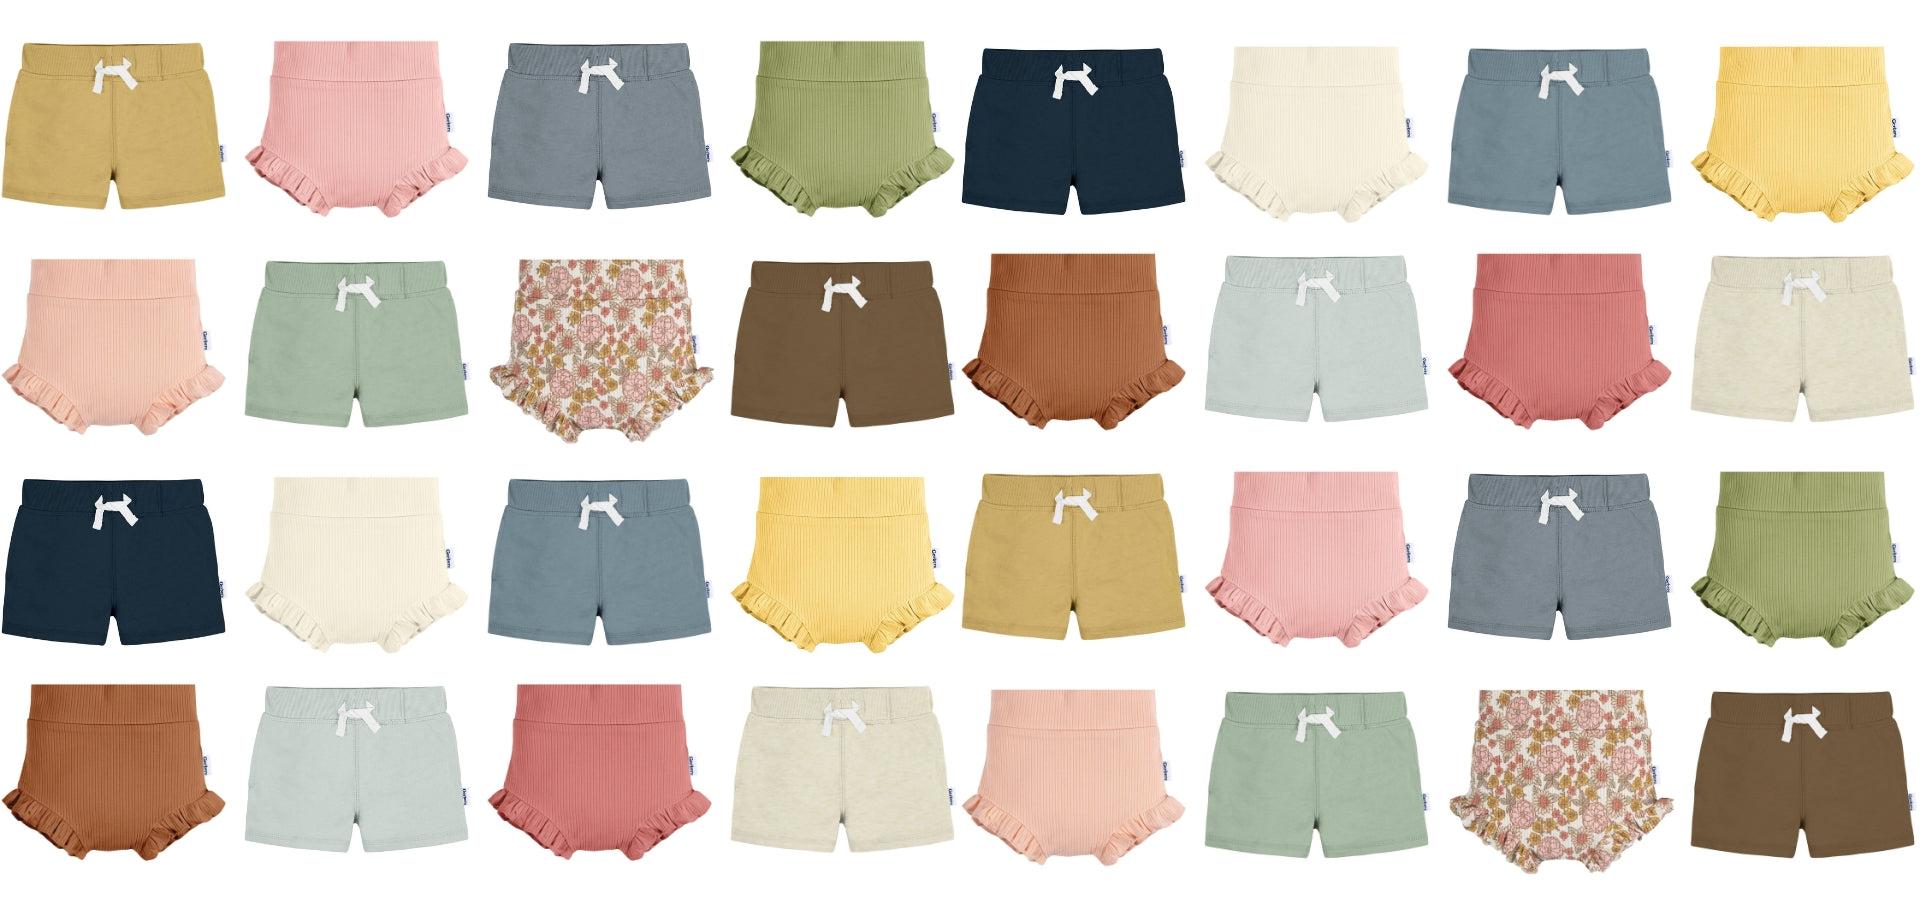 Assortment of colorful shorts on a white background.